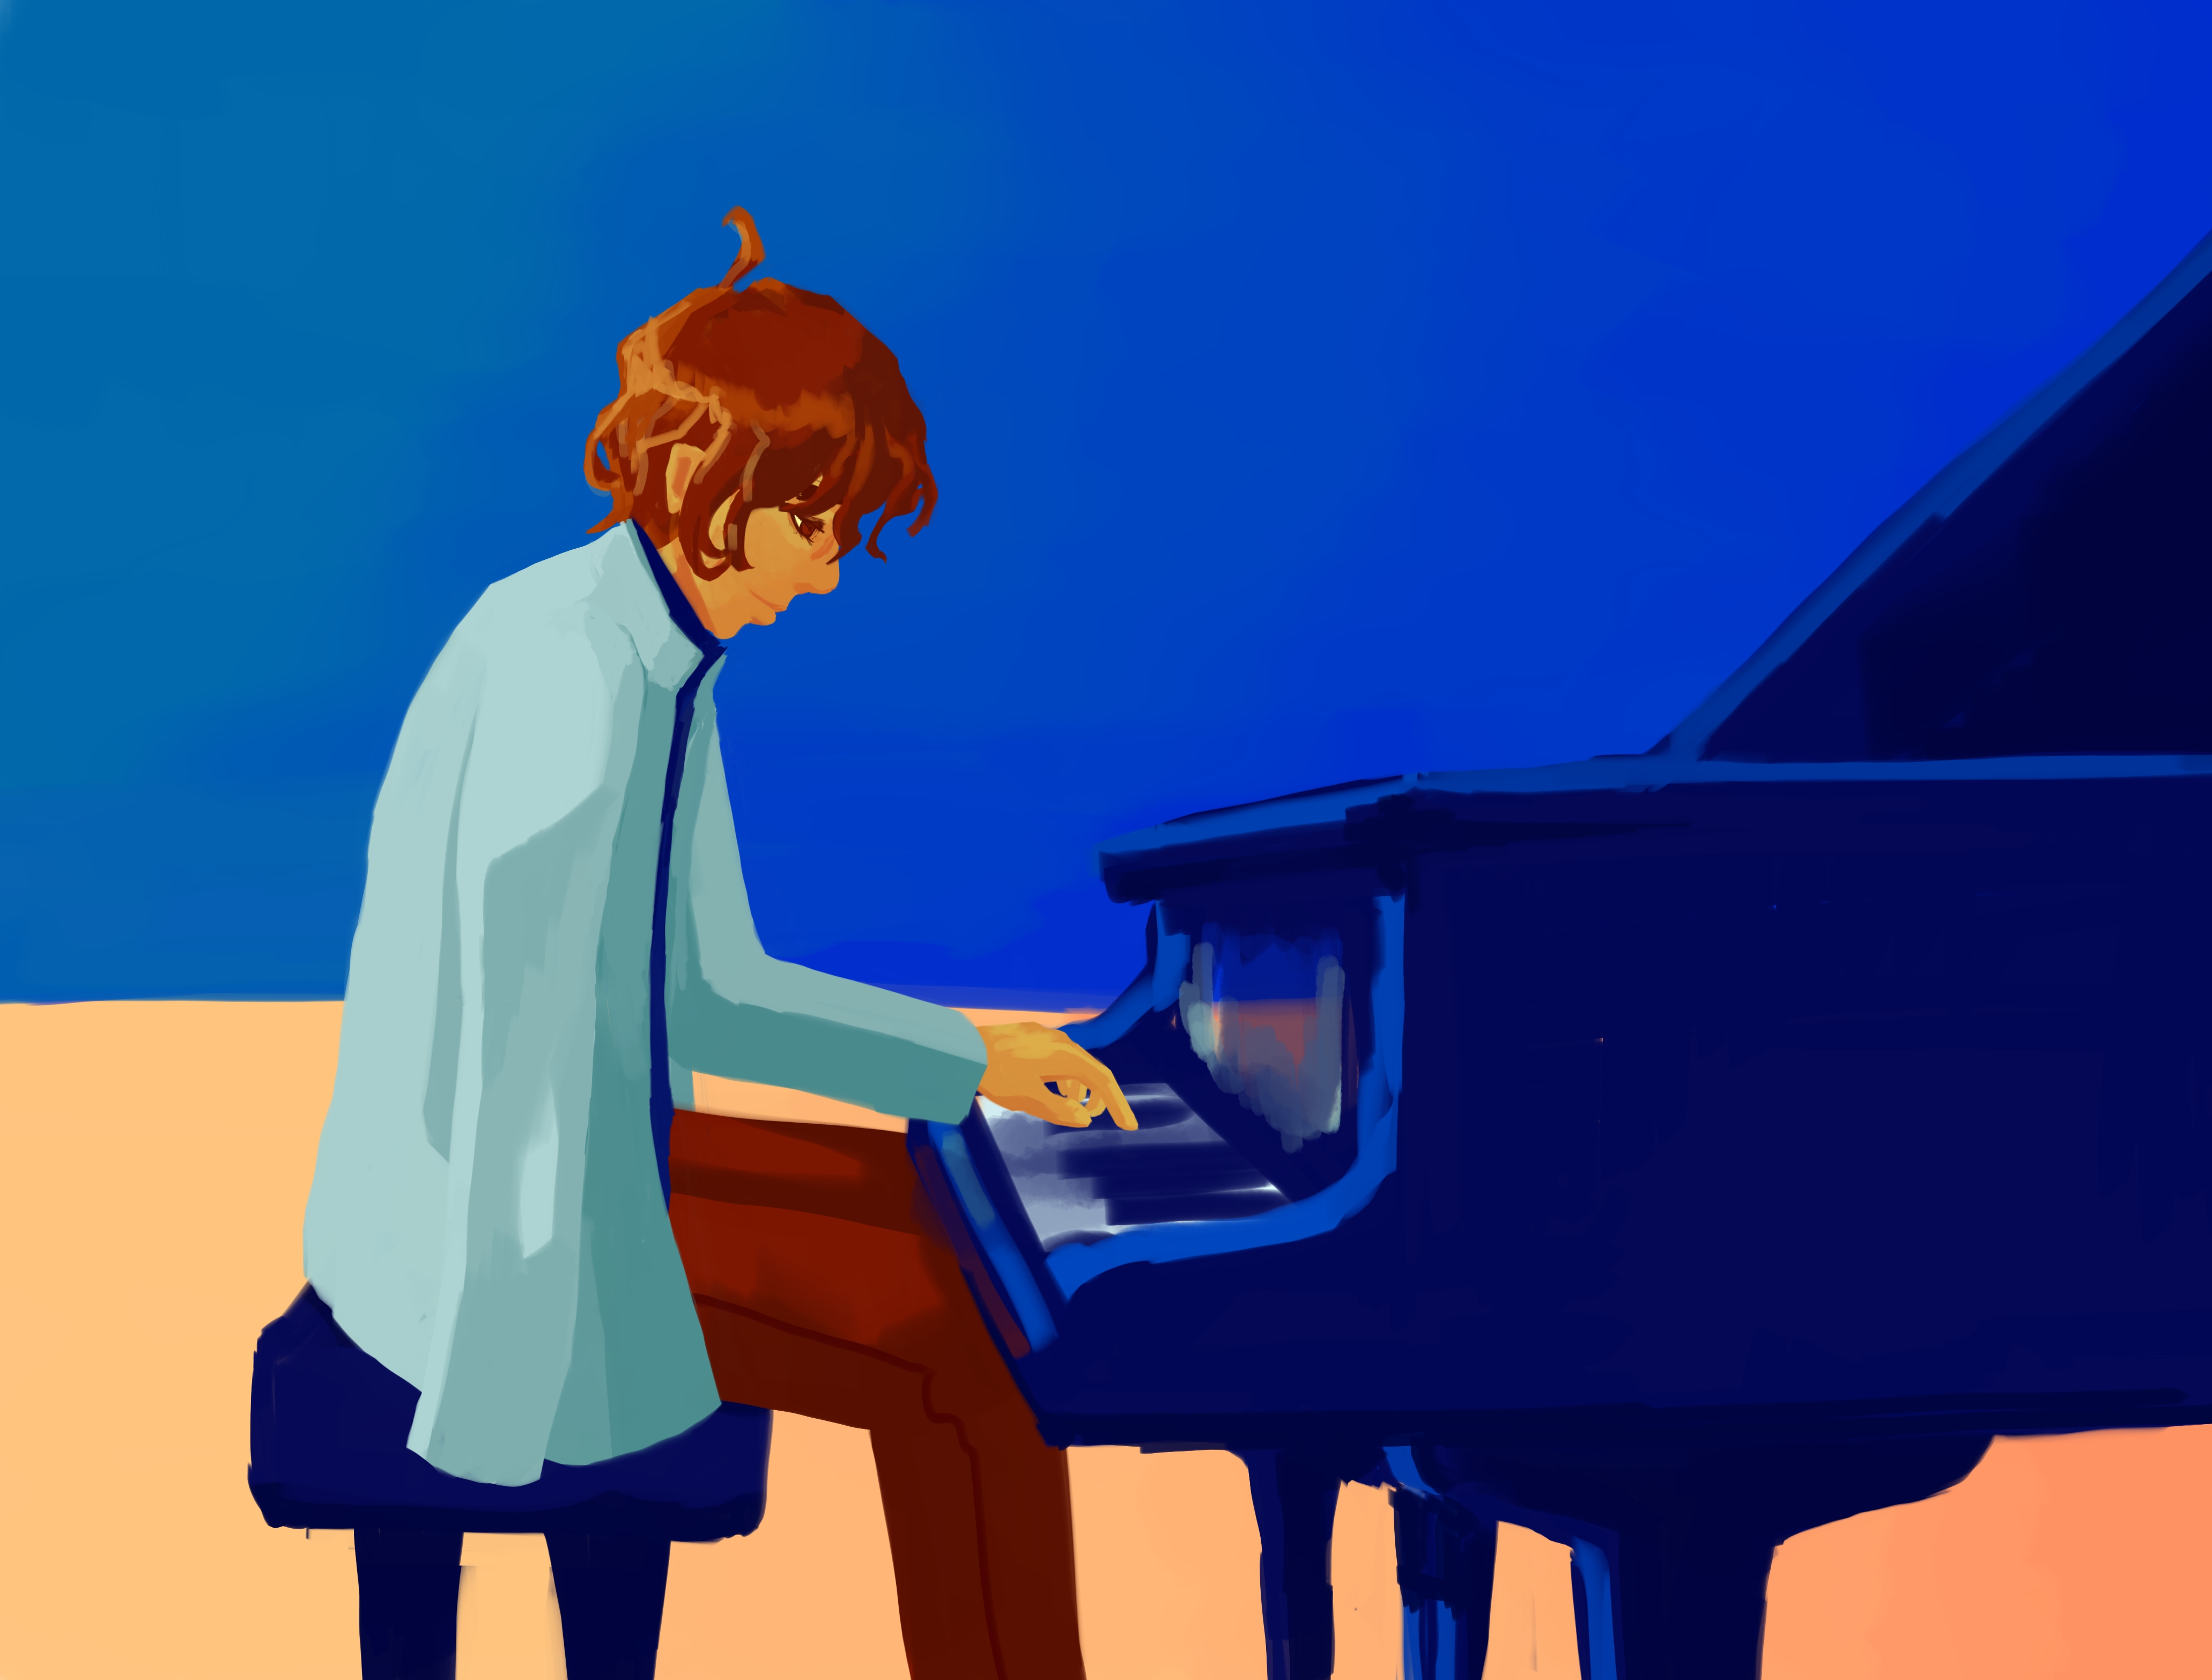 Brown haired person with curly hair with one arm sits at a reflective blue piano